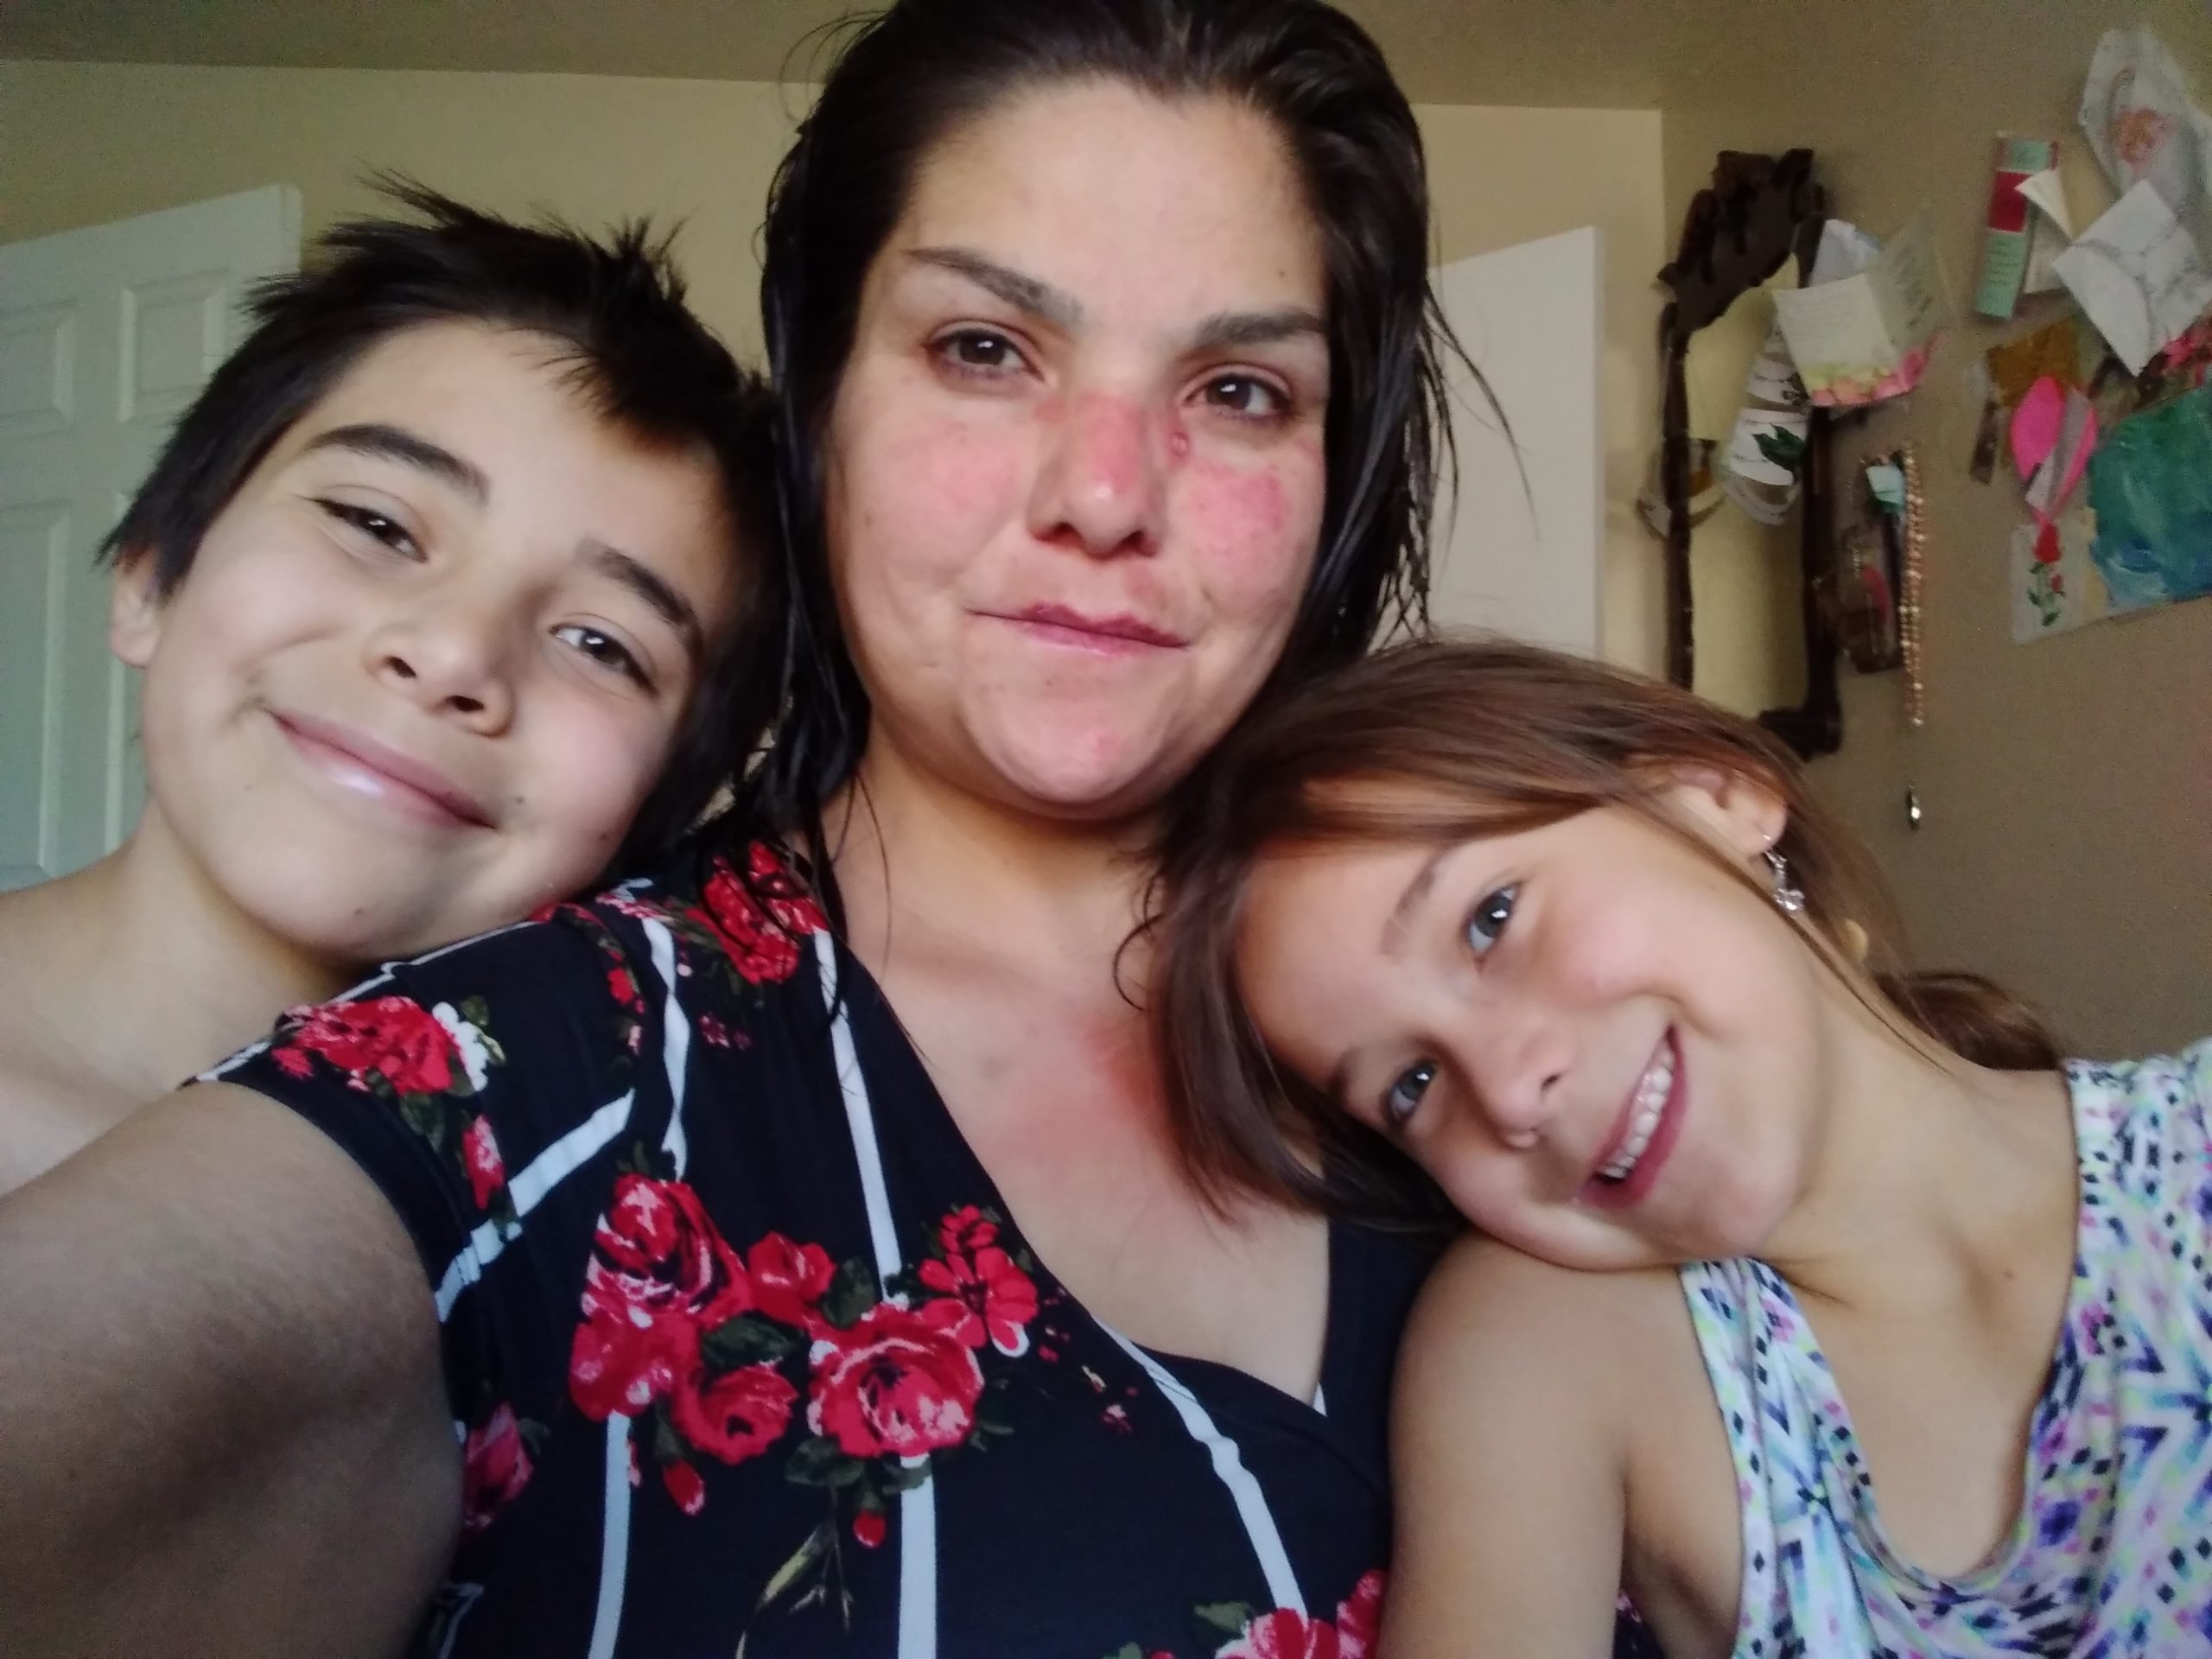 A single mom in Albuquerque faces homelessness without rent relief